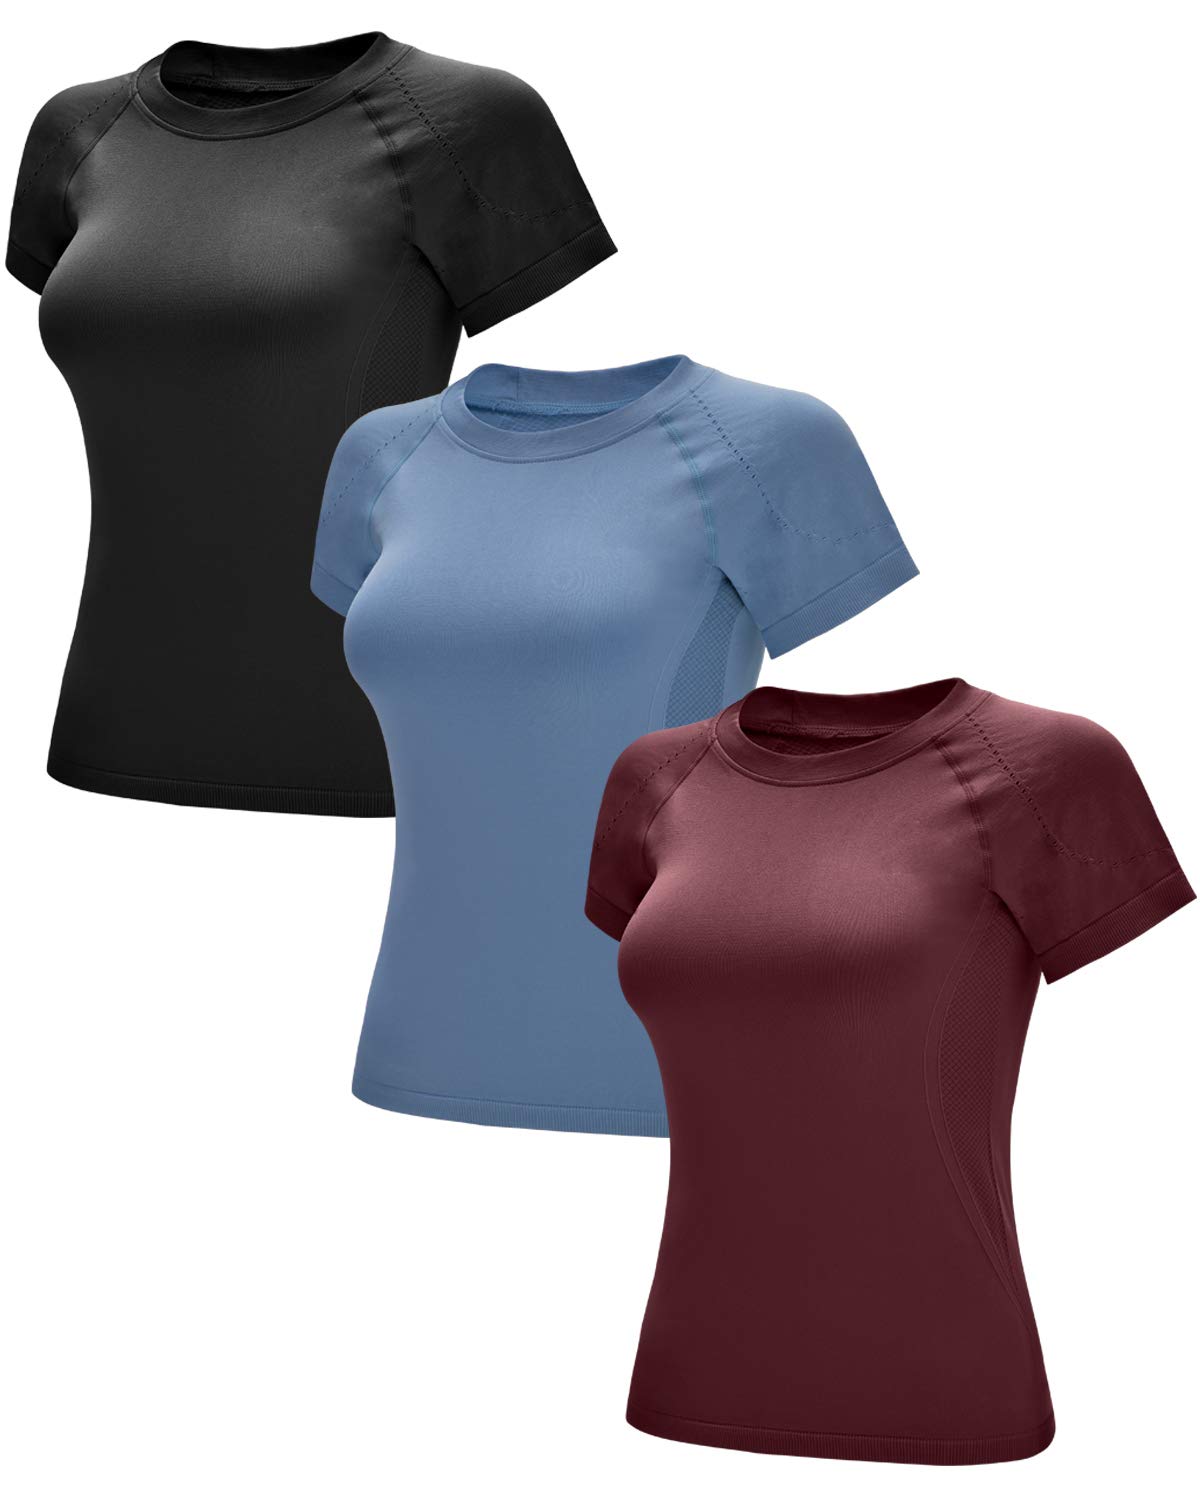 RUNNING GIRL Seamless Workout Shirts for Women Dry-Fit Short